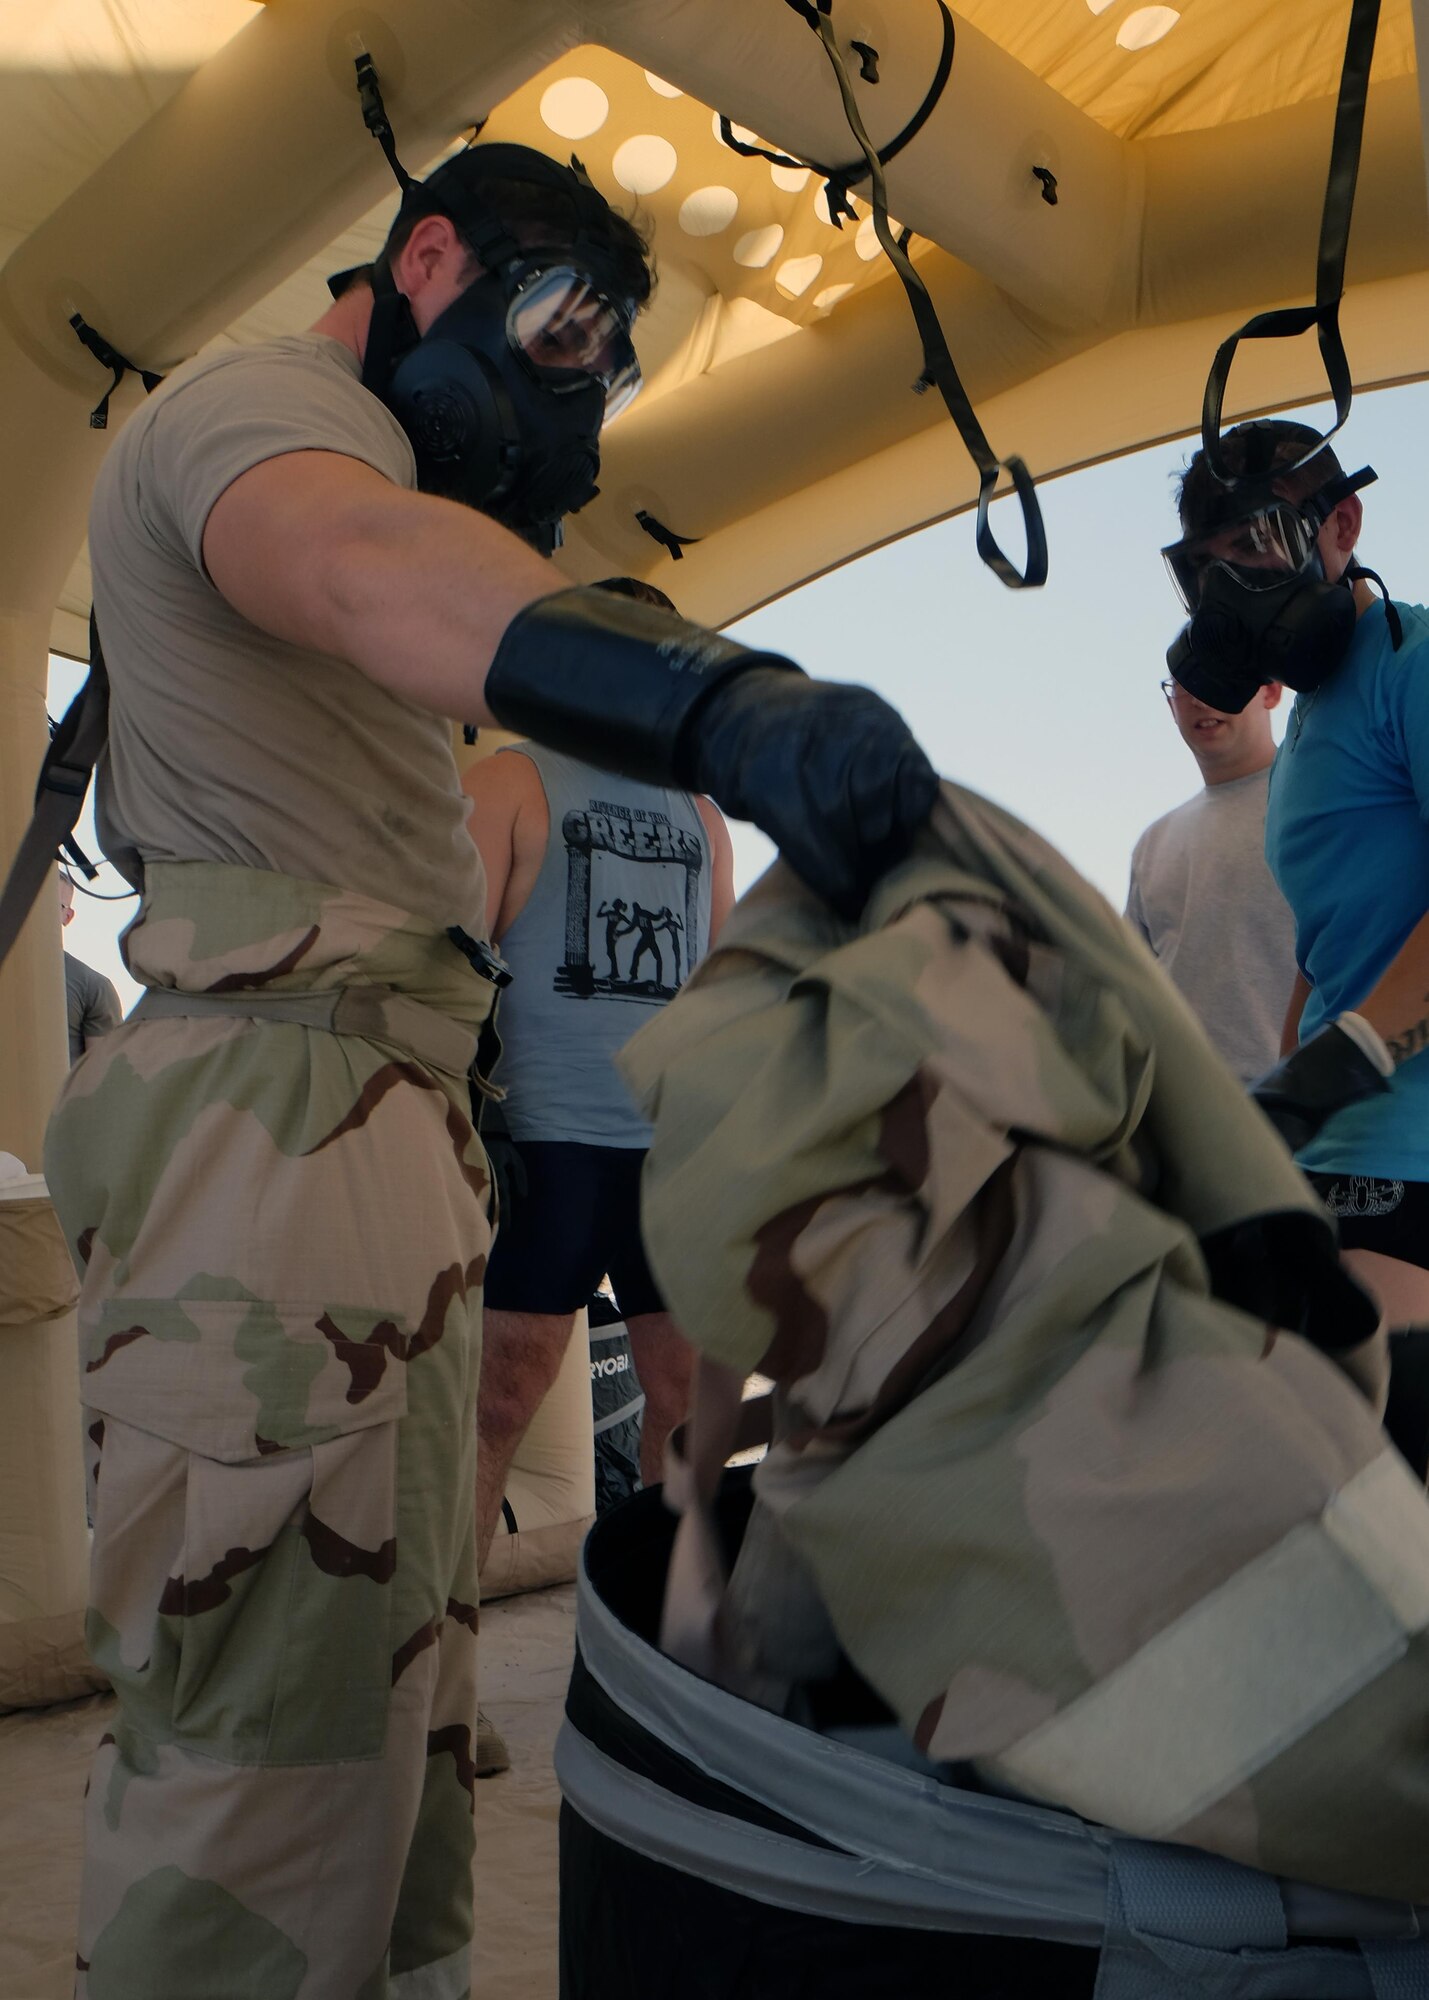 Airmen with the 380th Expeditionary Civil Engineer Squadron discard 'contaminated' equipment during Contamination Control Area training in a Lightweight Inflatable Decontamination System June 8, 2017, at an undisclosed location in southwest Asia. The purpose of the CCA was to train Airmen and Soldiers on how to properly remove contaminated individual protective equipment after a chemical or biological attack. (U.S. Air Force photo by Senior Airman Preston Webb)